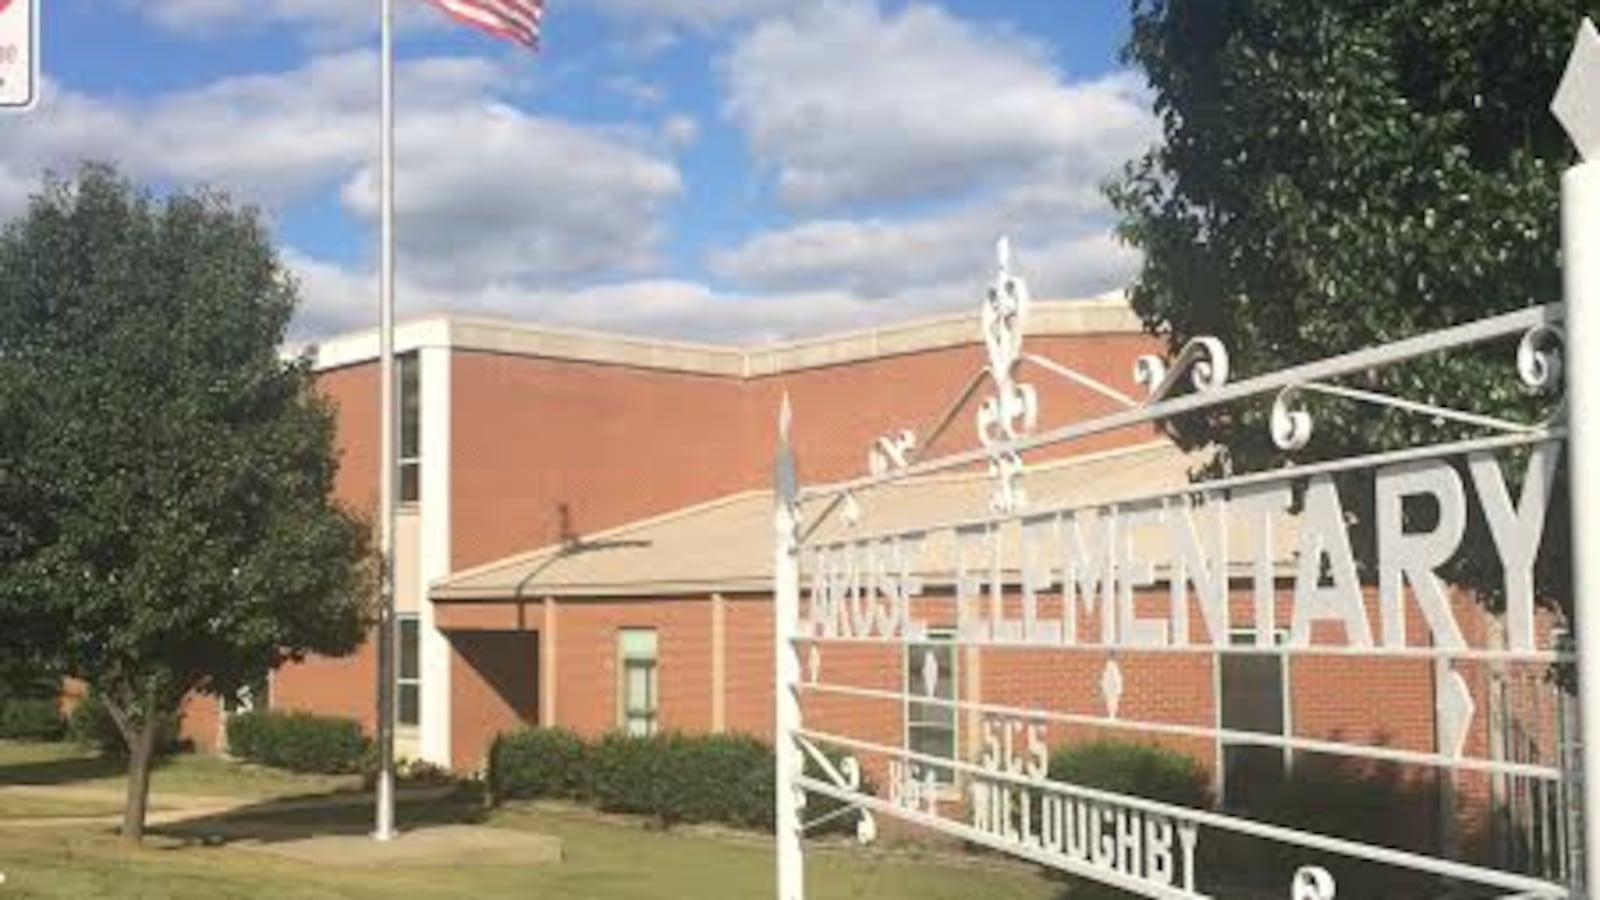 LaRose Elementary was one of two Memphis elementary schools flagged for potential cheating. Both were cleared.